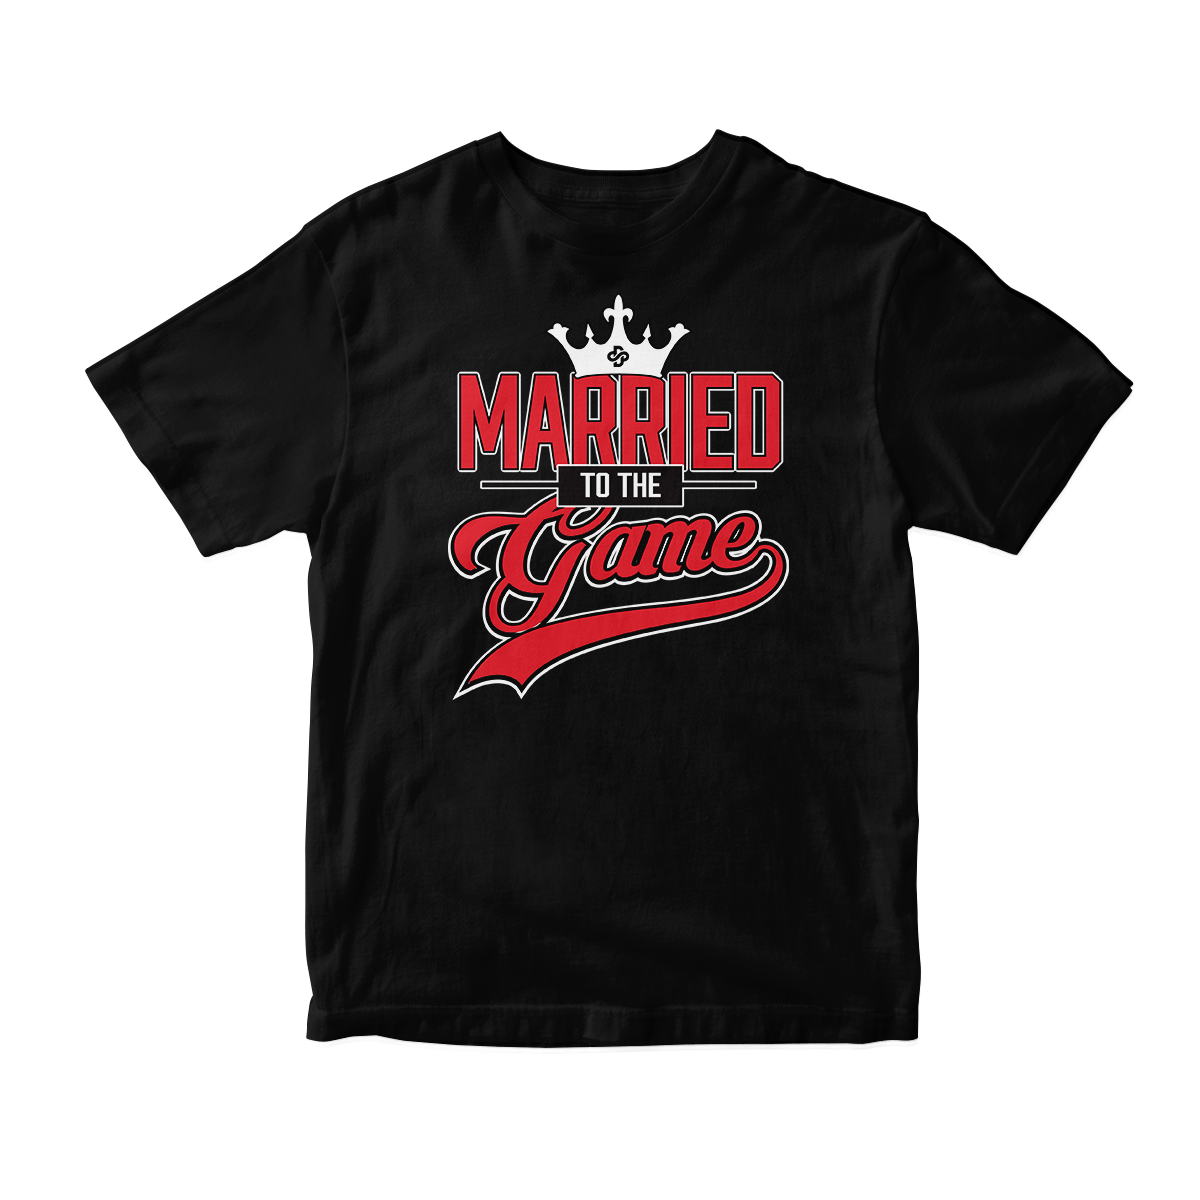 'Married To The Game' in Bred 11 CW Short Sleeve Tee